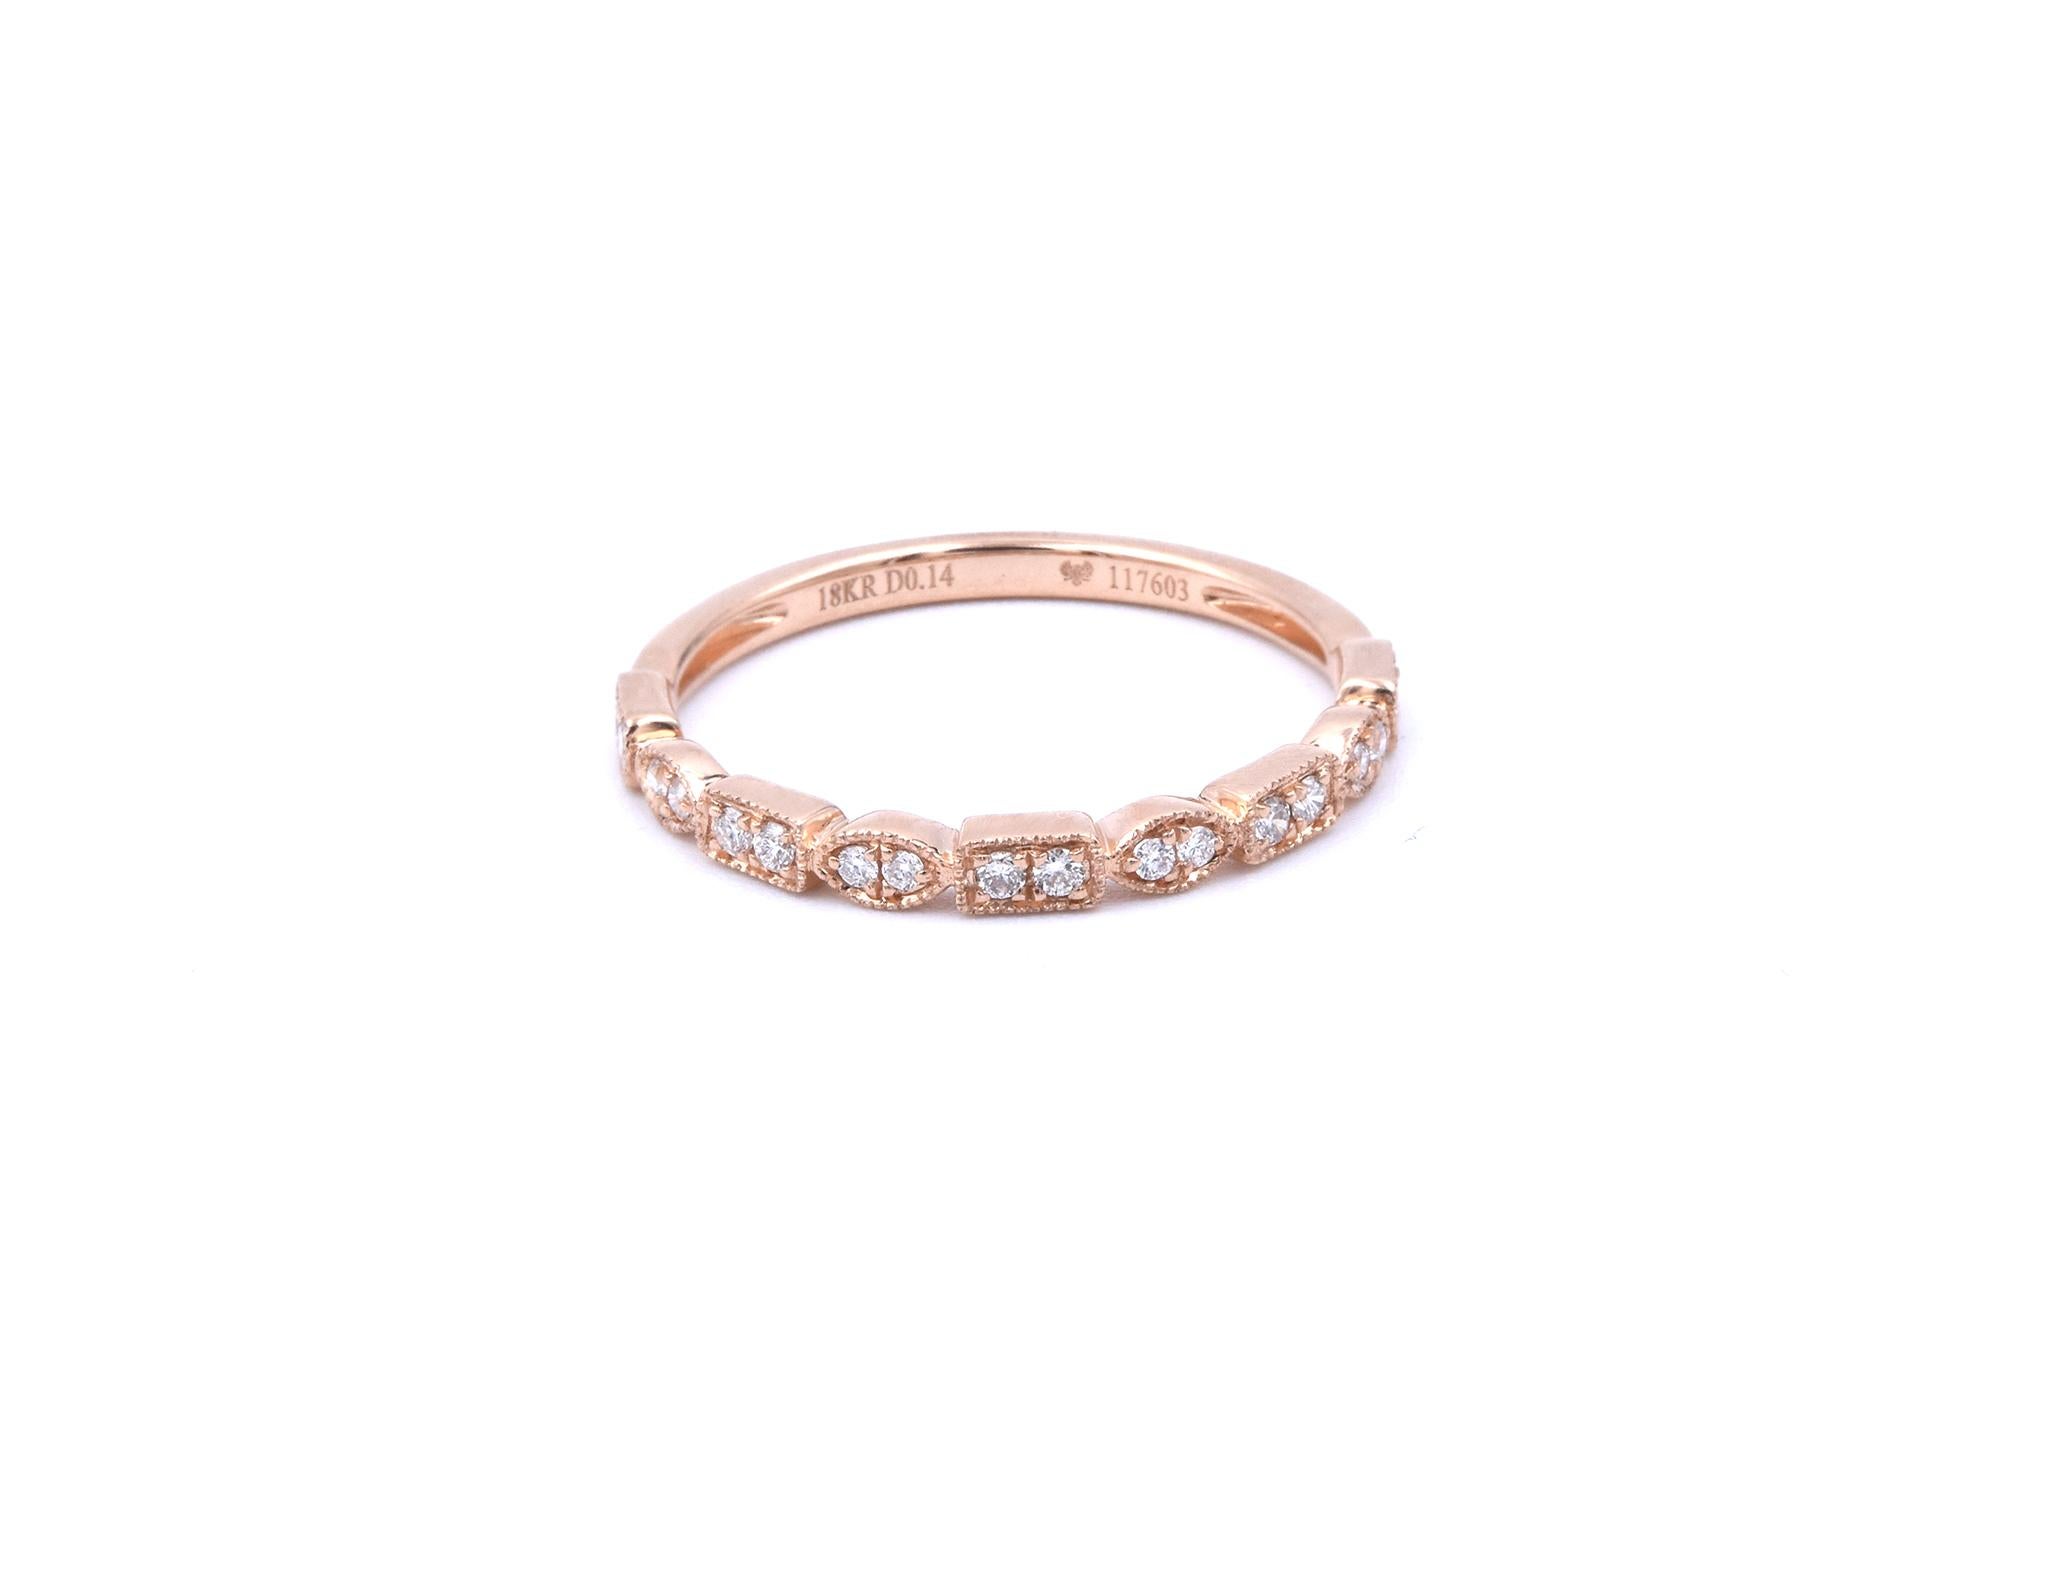 Material: 18k rose gold
Diamonds: 13 round brilliant cuts = 0.15cttw
Color: G
Clarity: VS
Size: 6 ¾ (please allow two additional shipping days for sizing requests)  
Dimensions: ring measures 2.40mm in width
Weight: 2.5 grams
